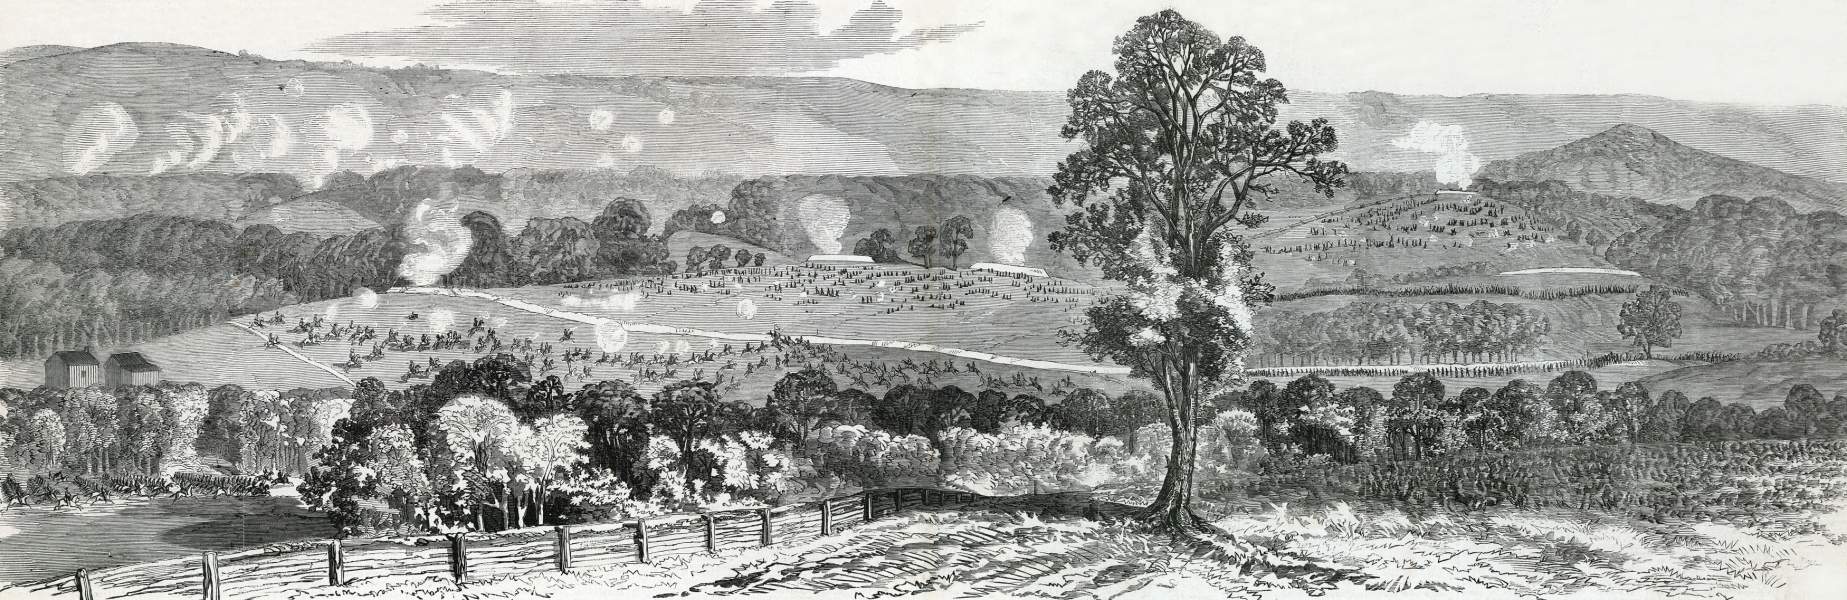 Battle of Fisher's Hill, near Strasburg, Virginia, September 21-22, 1864, artist's impression, zoomable image